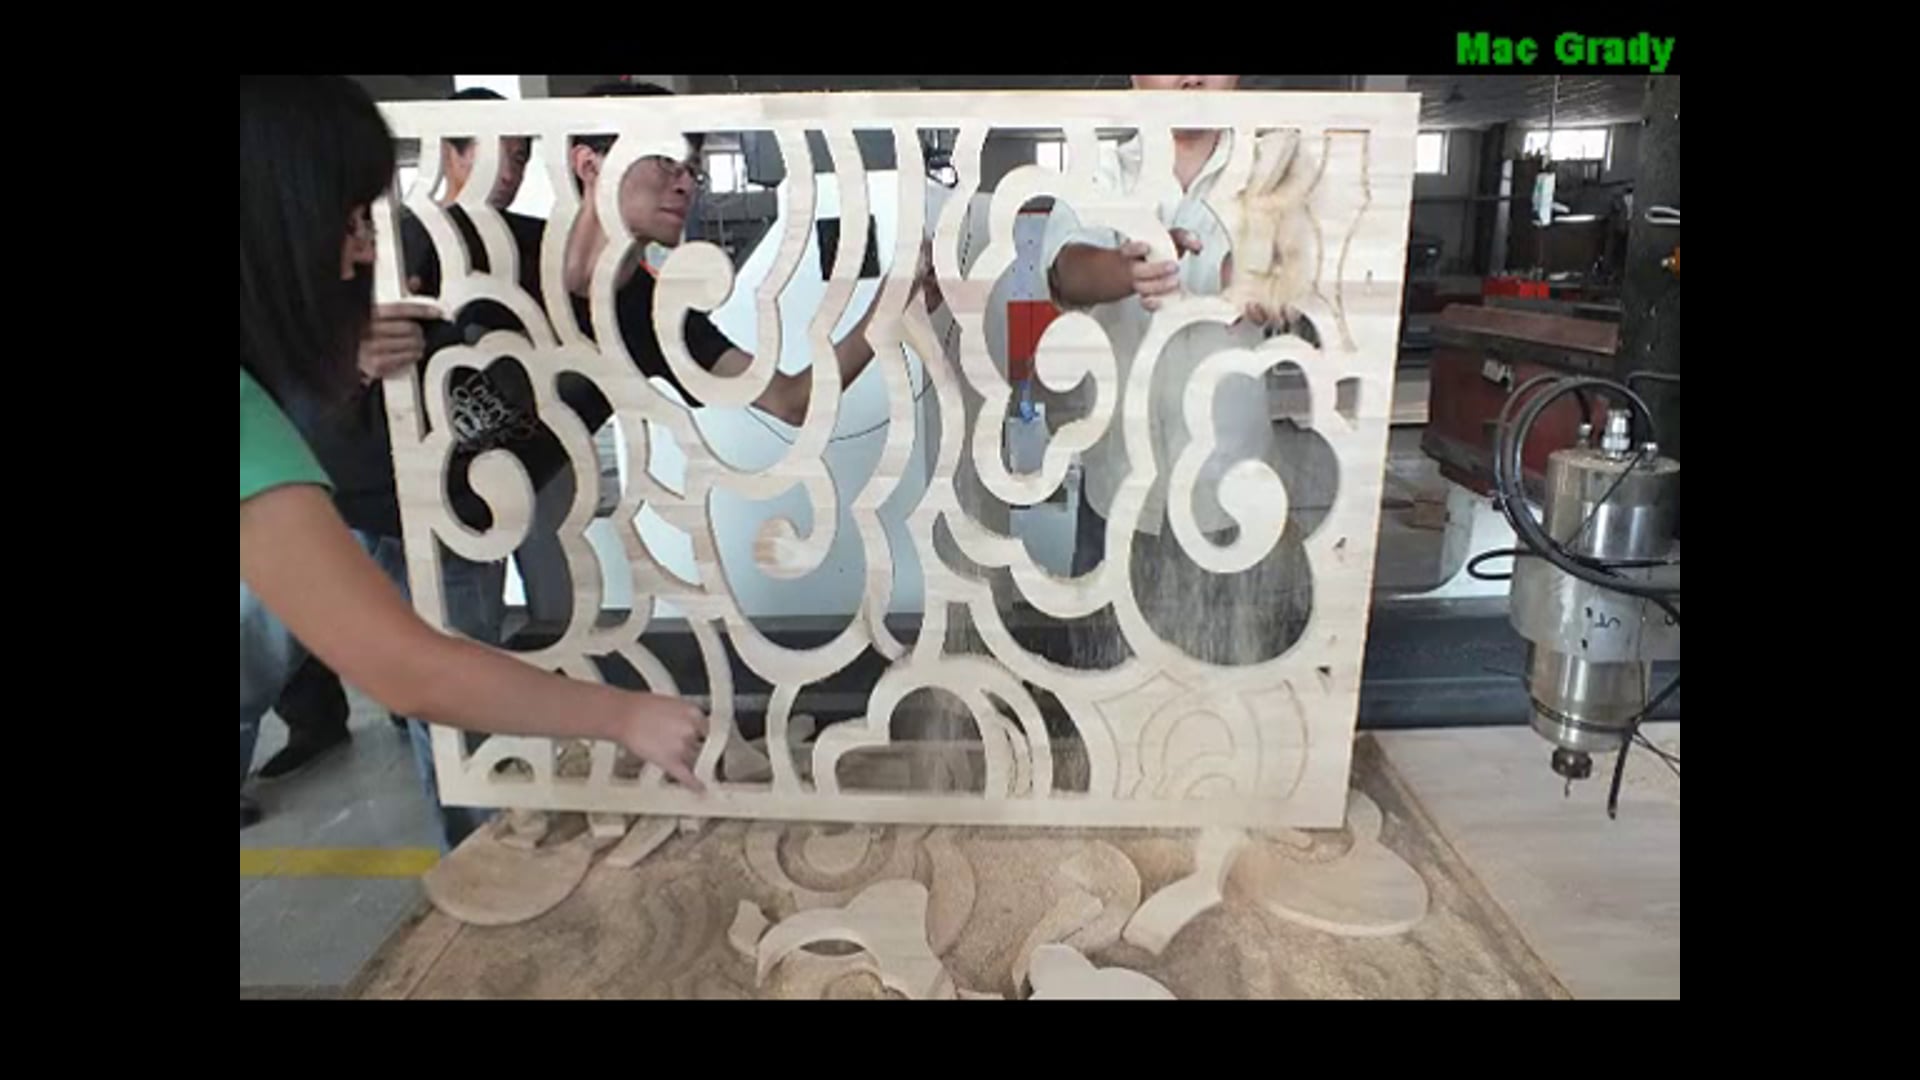 Cut-out engraving work,wood cnc router for openwork carving on wood video